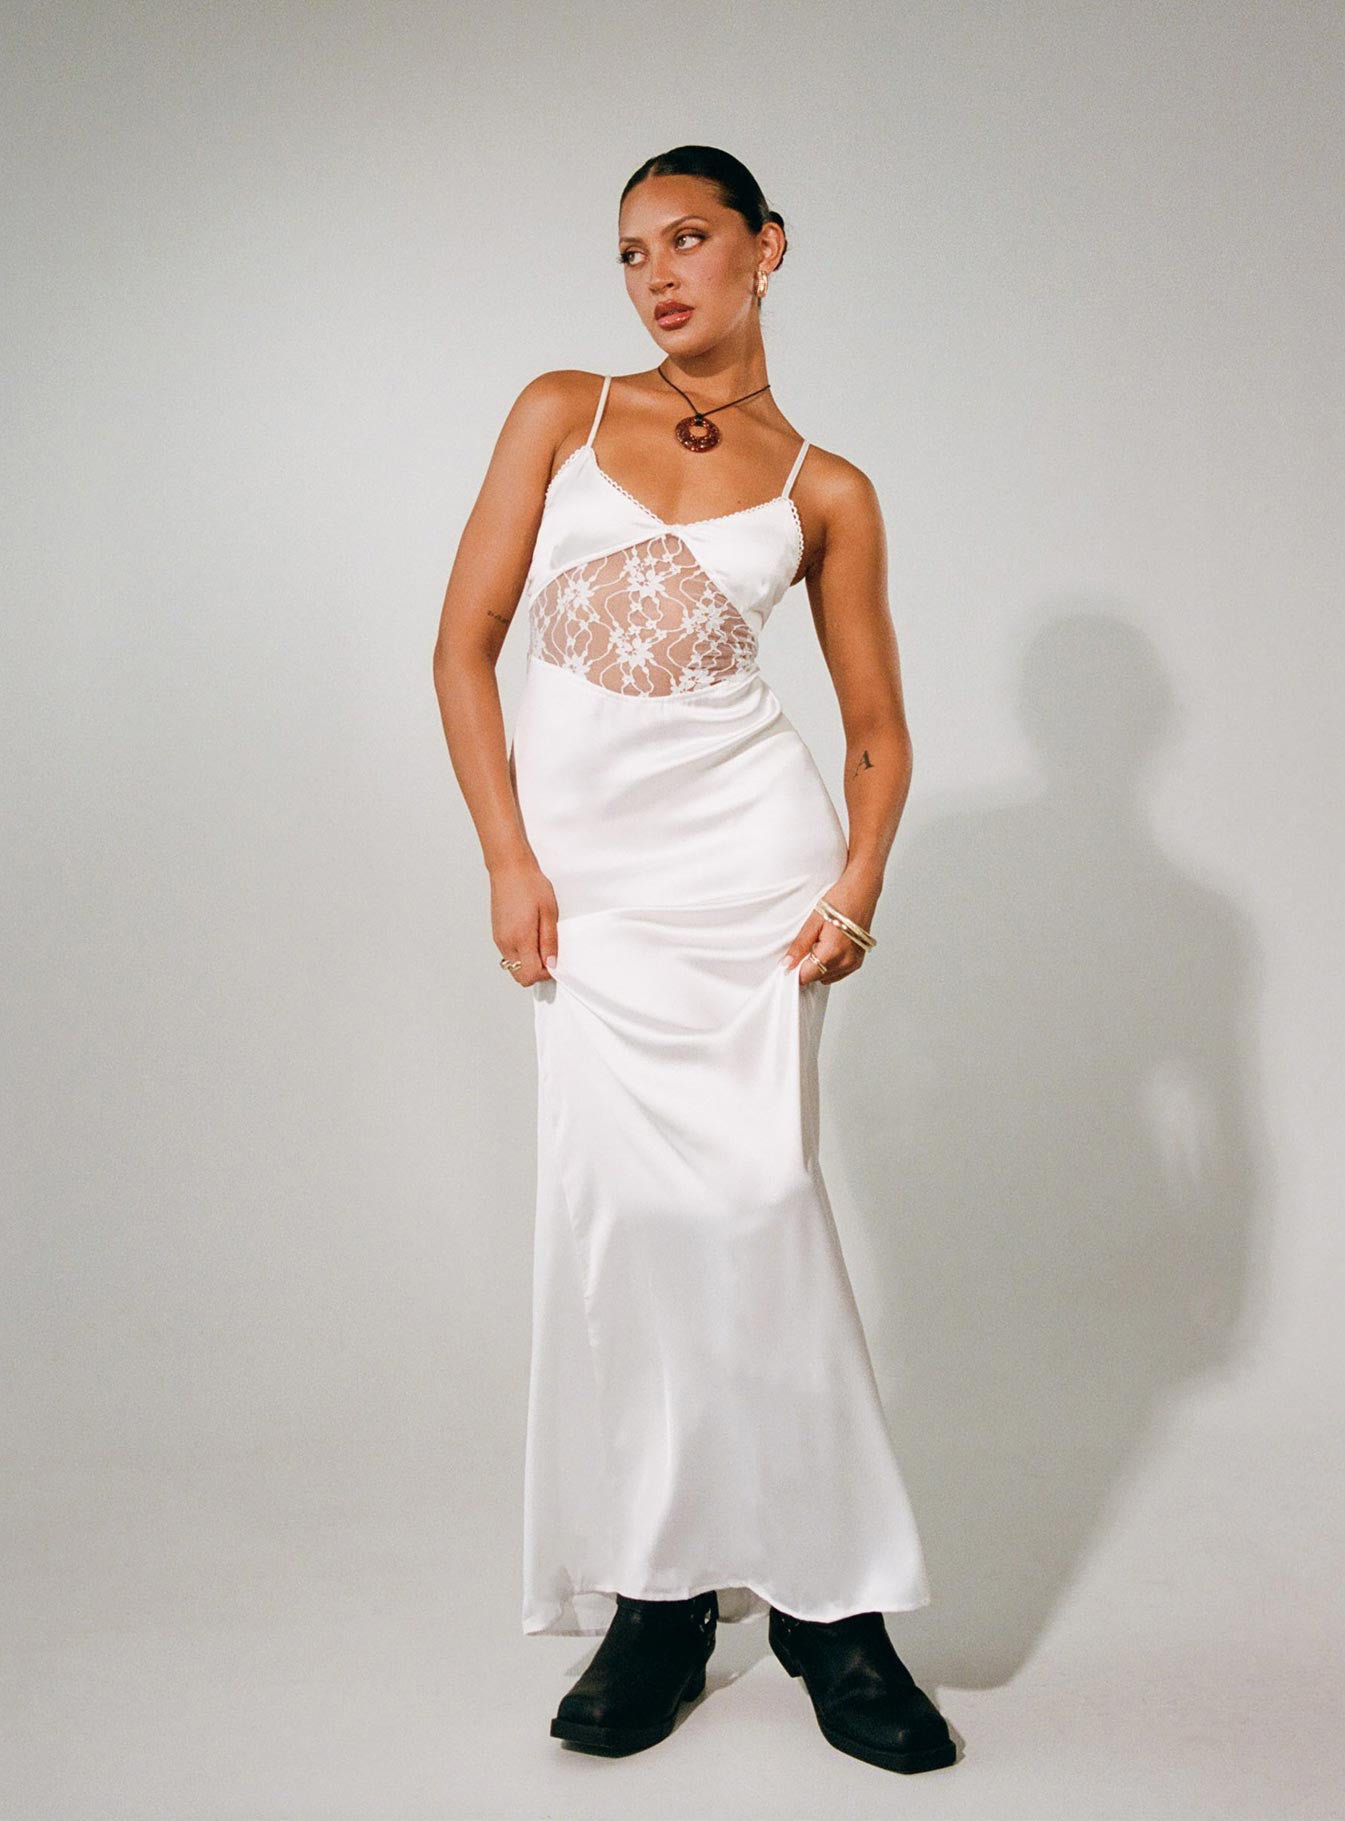 Shop Formal Dress - Roselle Maxi Dress White fifth image